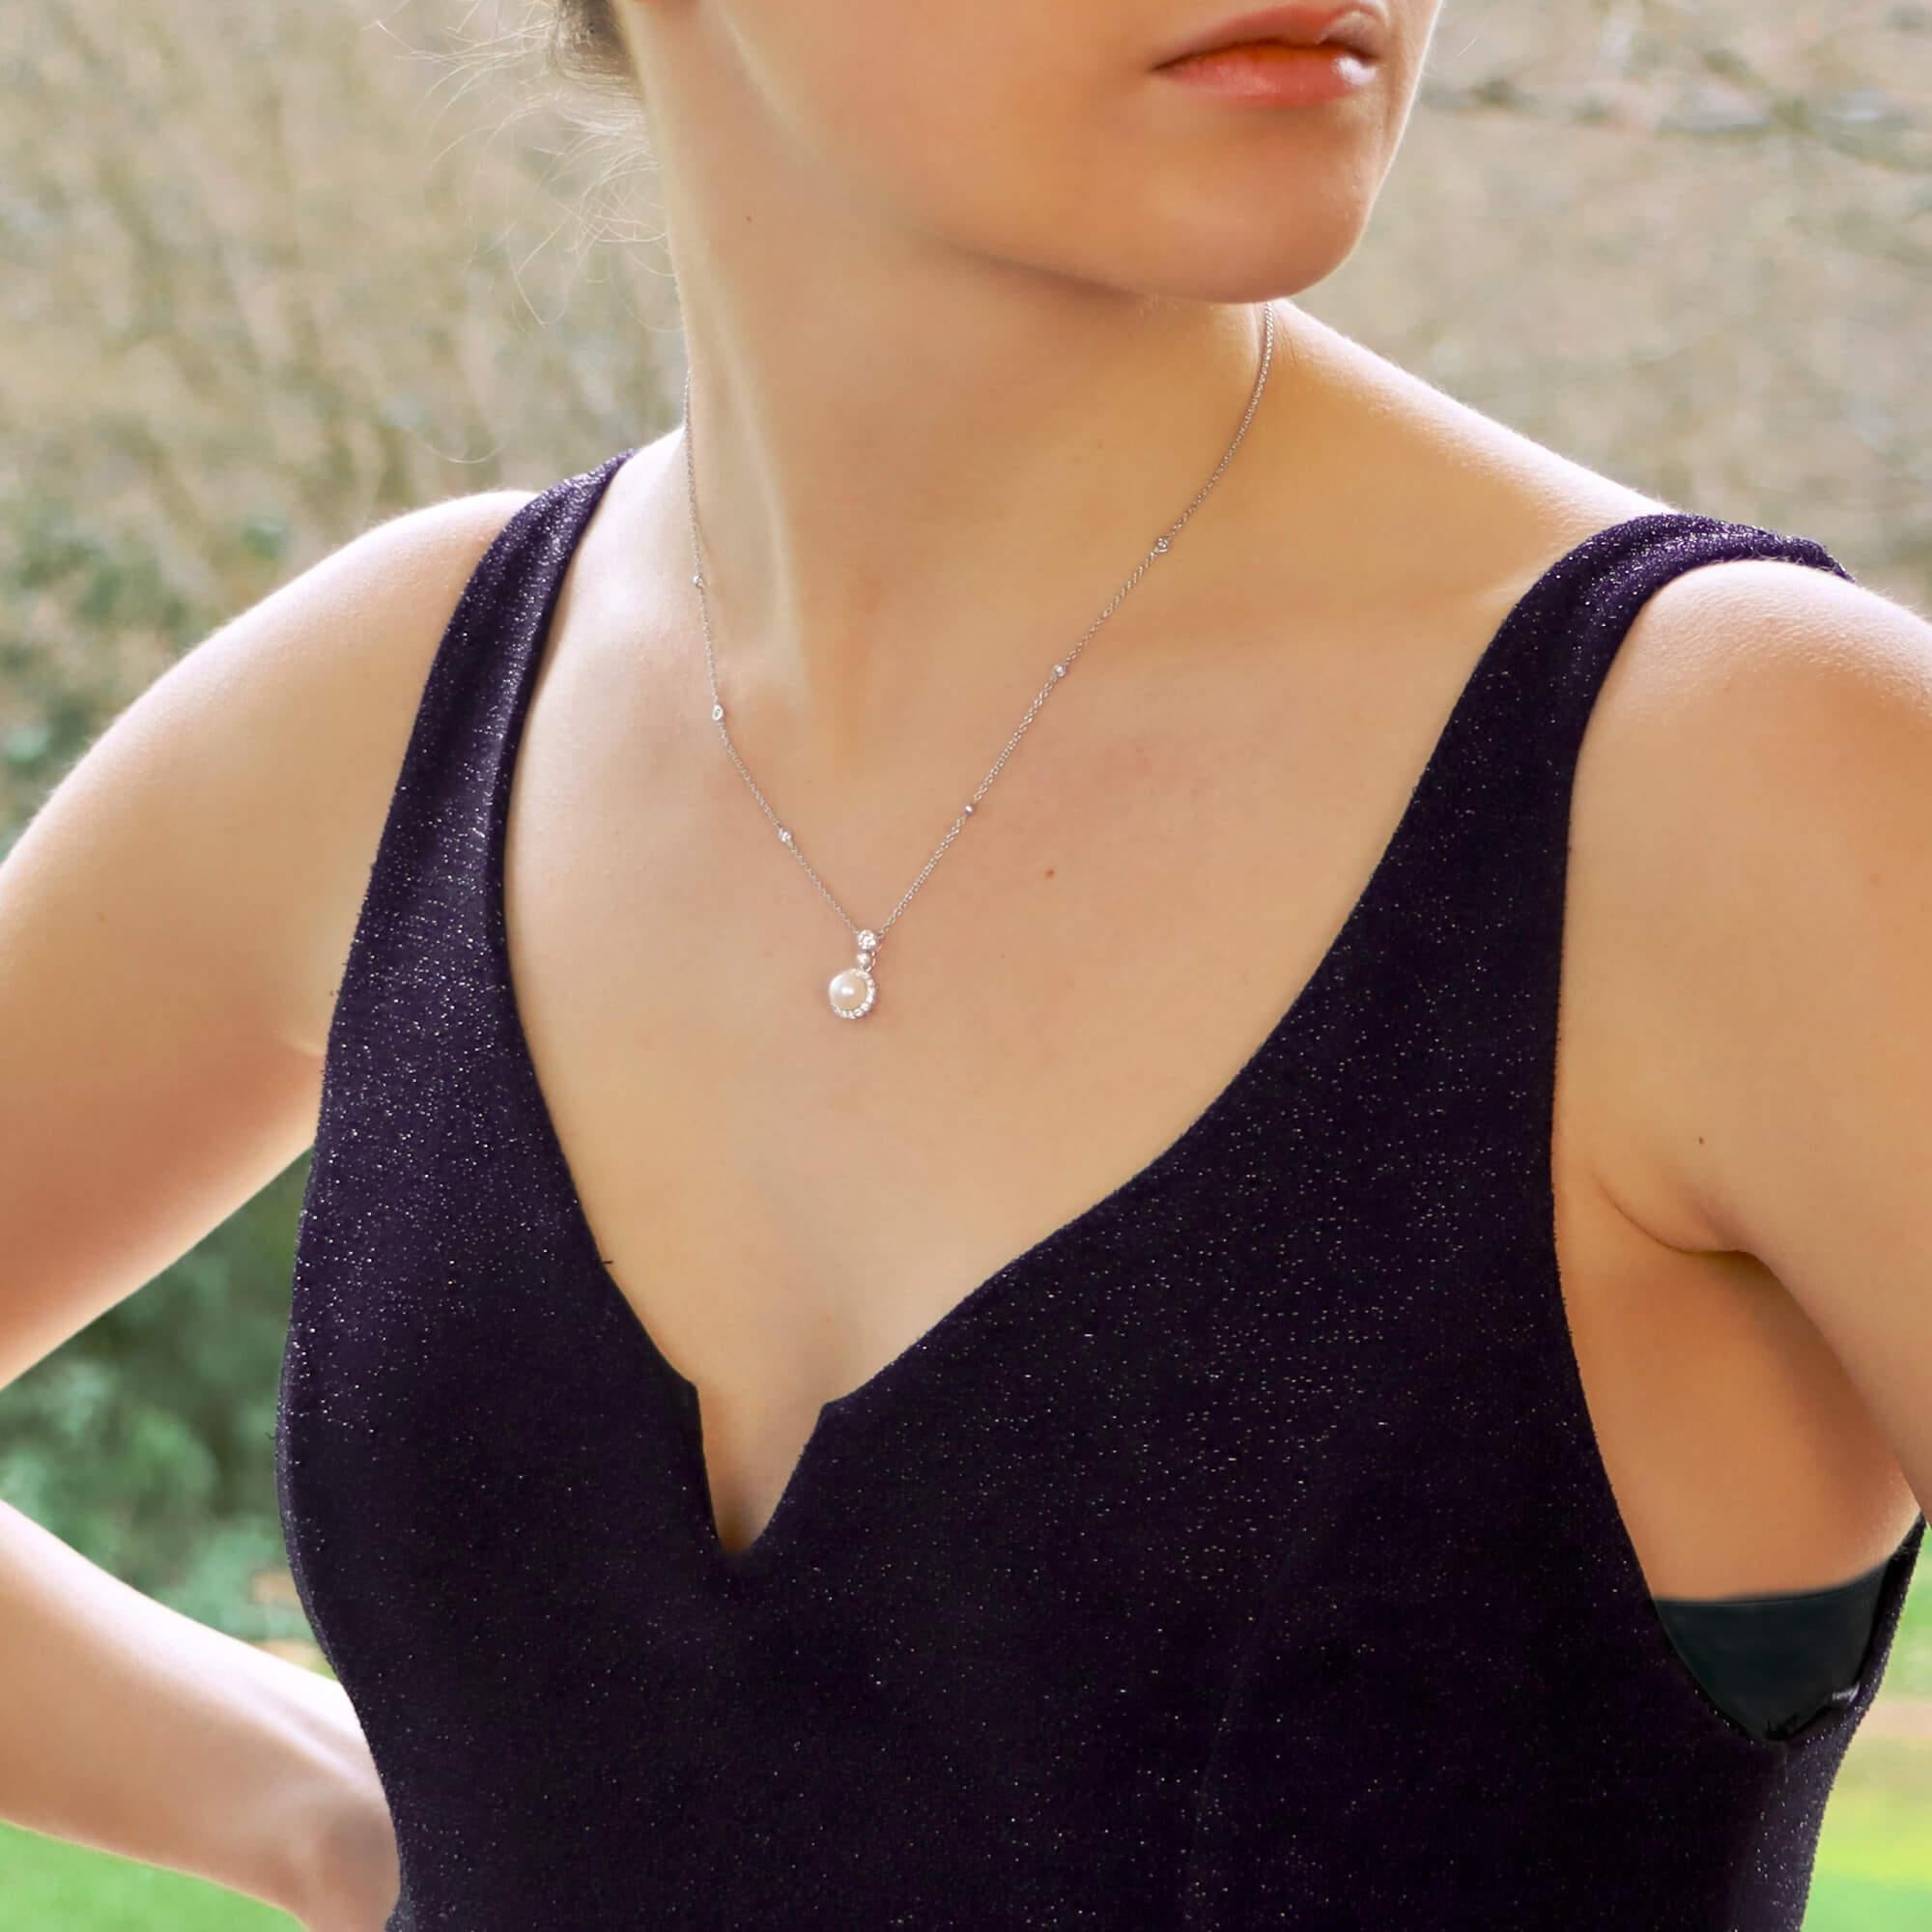 A fabulous little pearl and diamond pendant necklace set in 18k white gold.

The pendant prominently features a 9mm white cultured pearl which hangs from a rubover set round brilliant cut diamond. This single diamond is then suspended from a